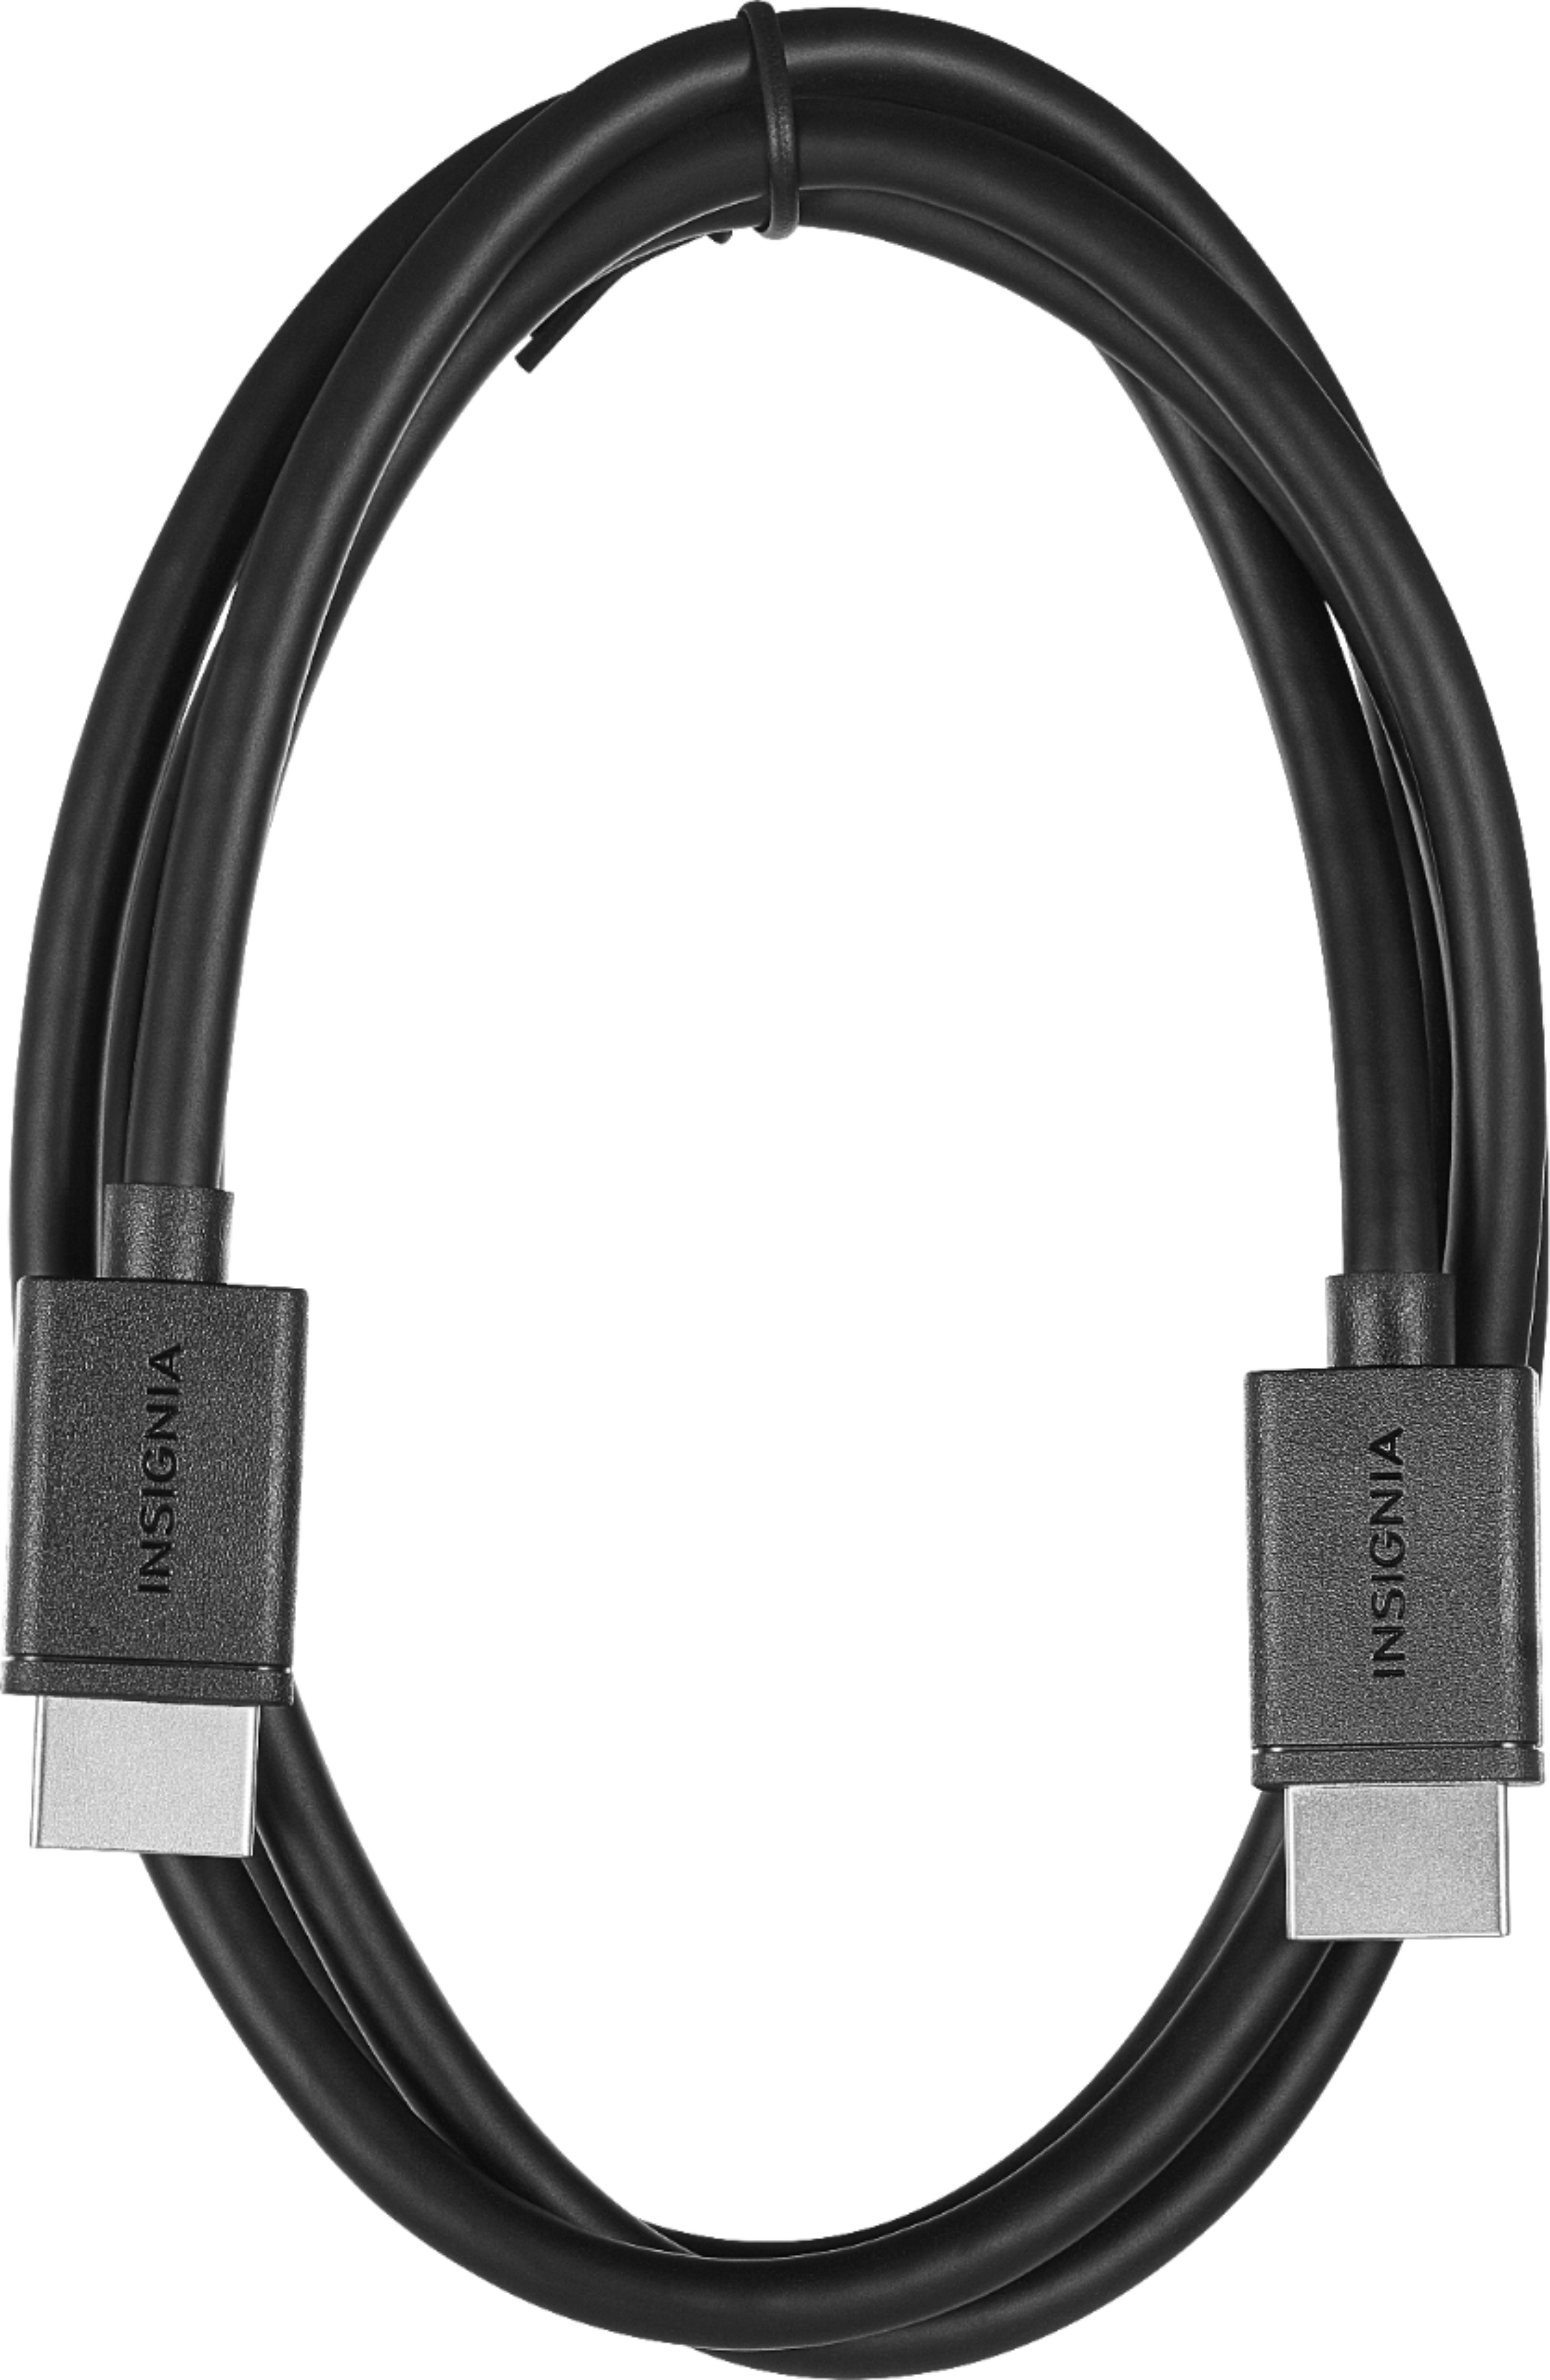 Insignia™ 25' 4K Ultra HD HDMI Cable Black NS-HG25507 - Best Buy